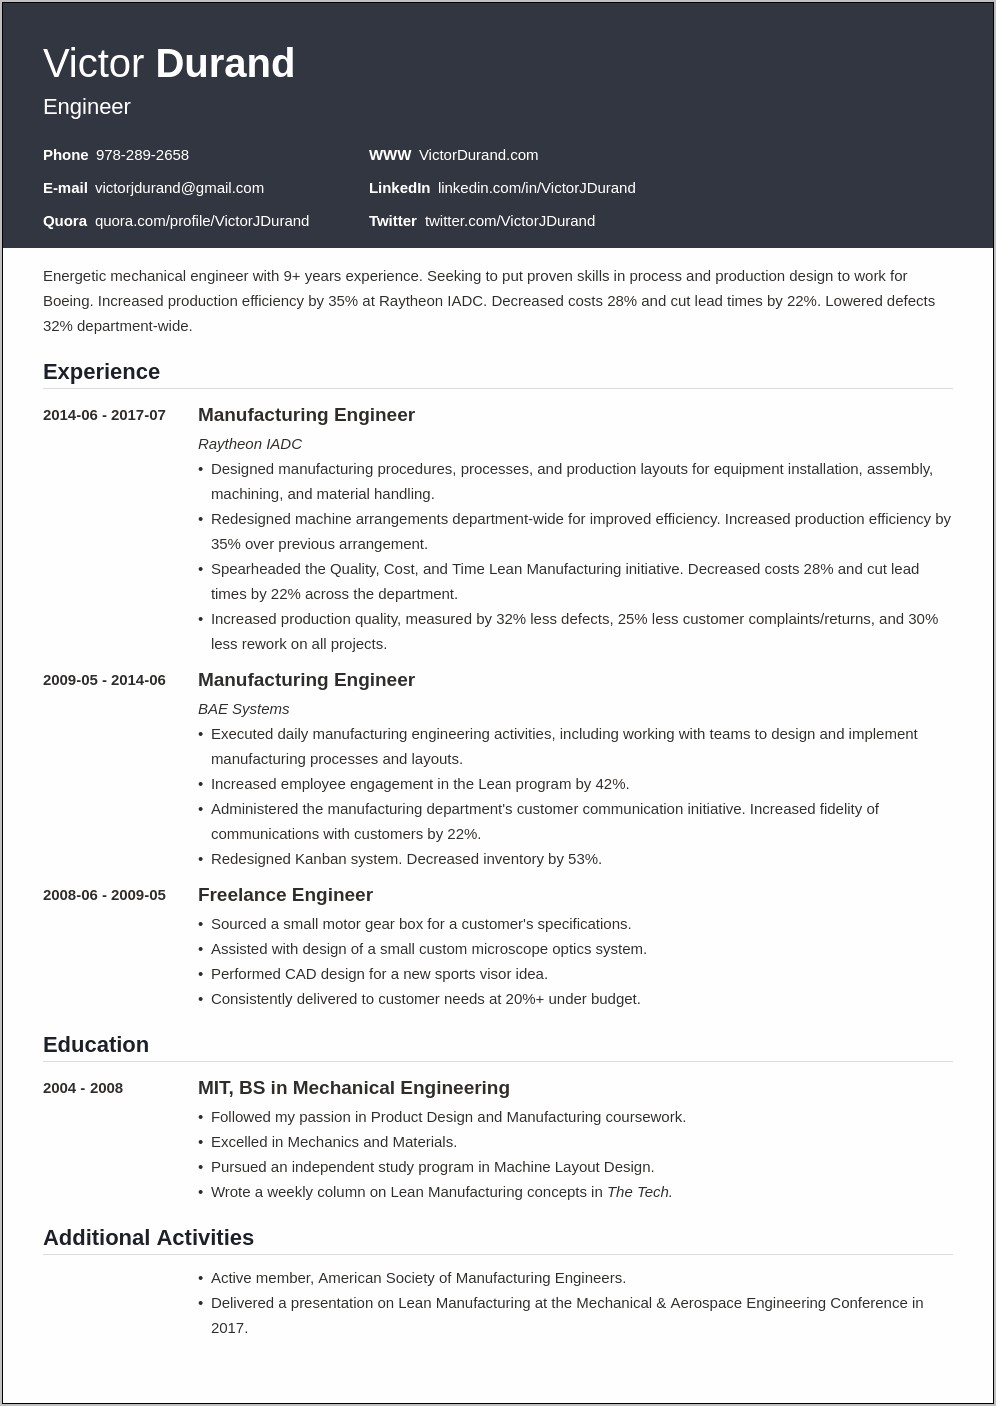 Professional Summary In Resume For Engineer